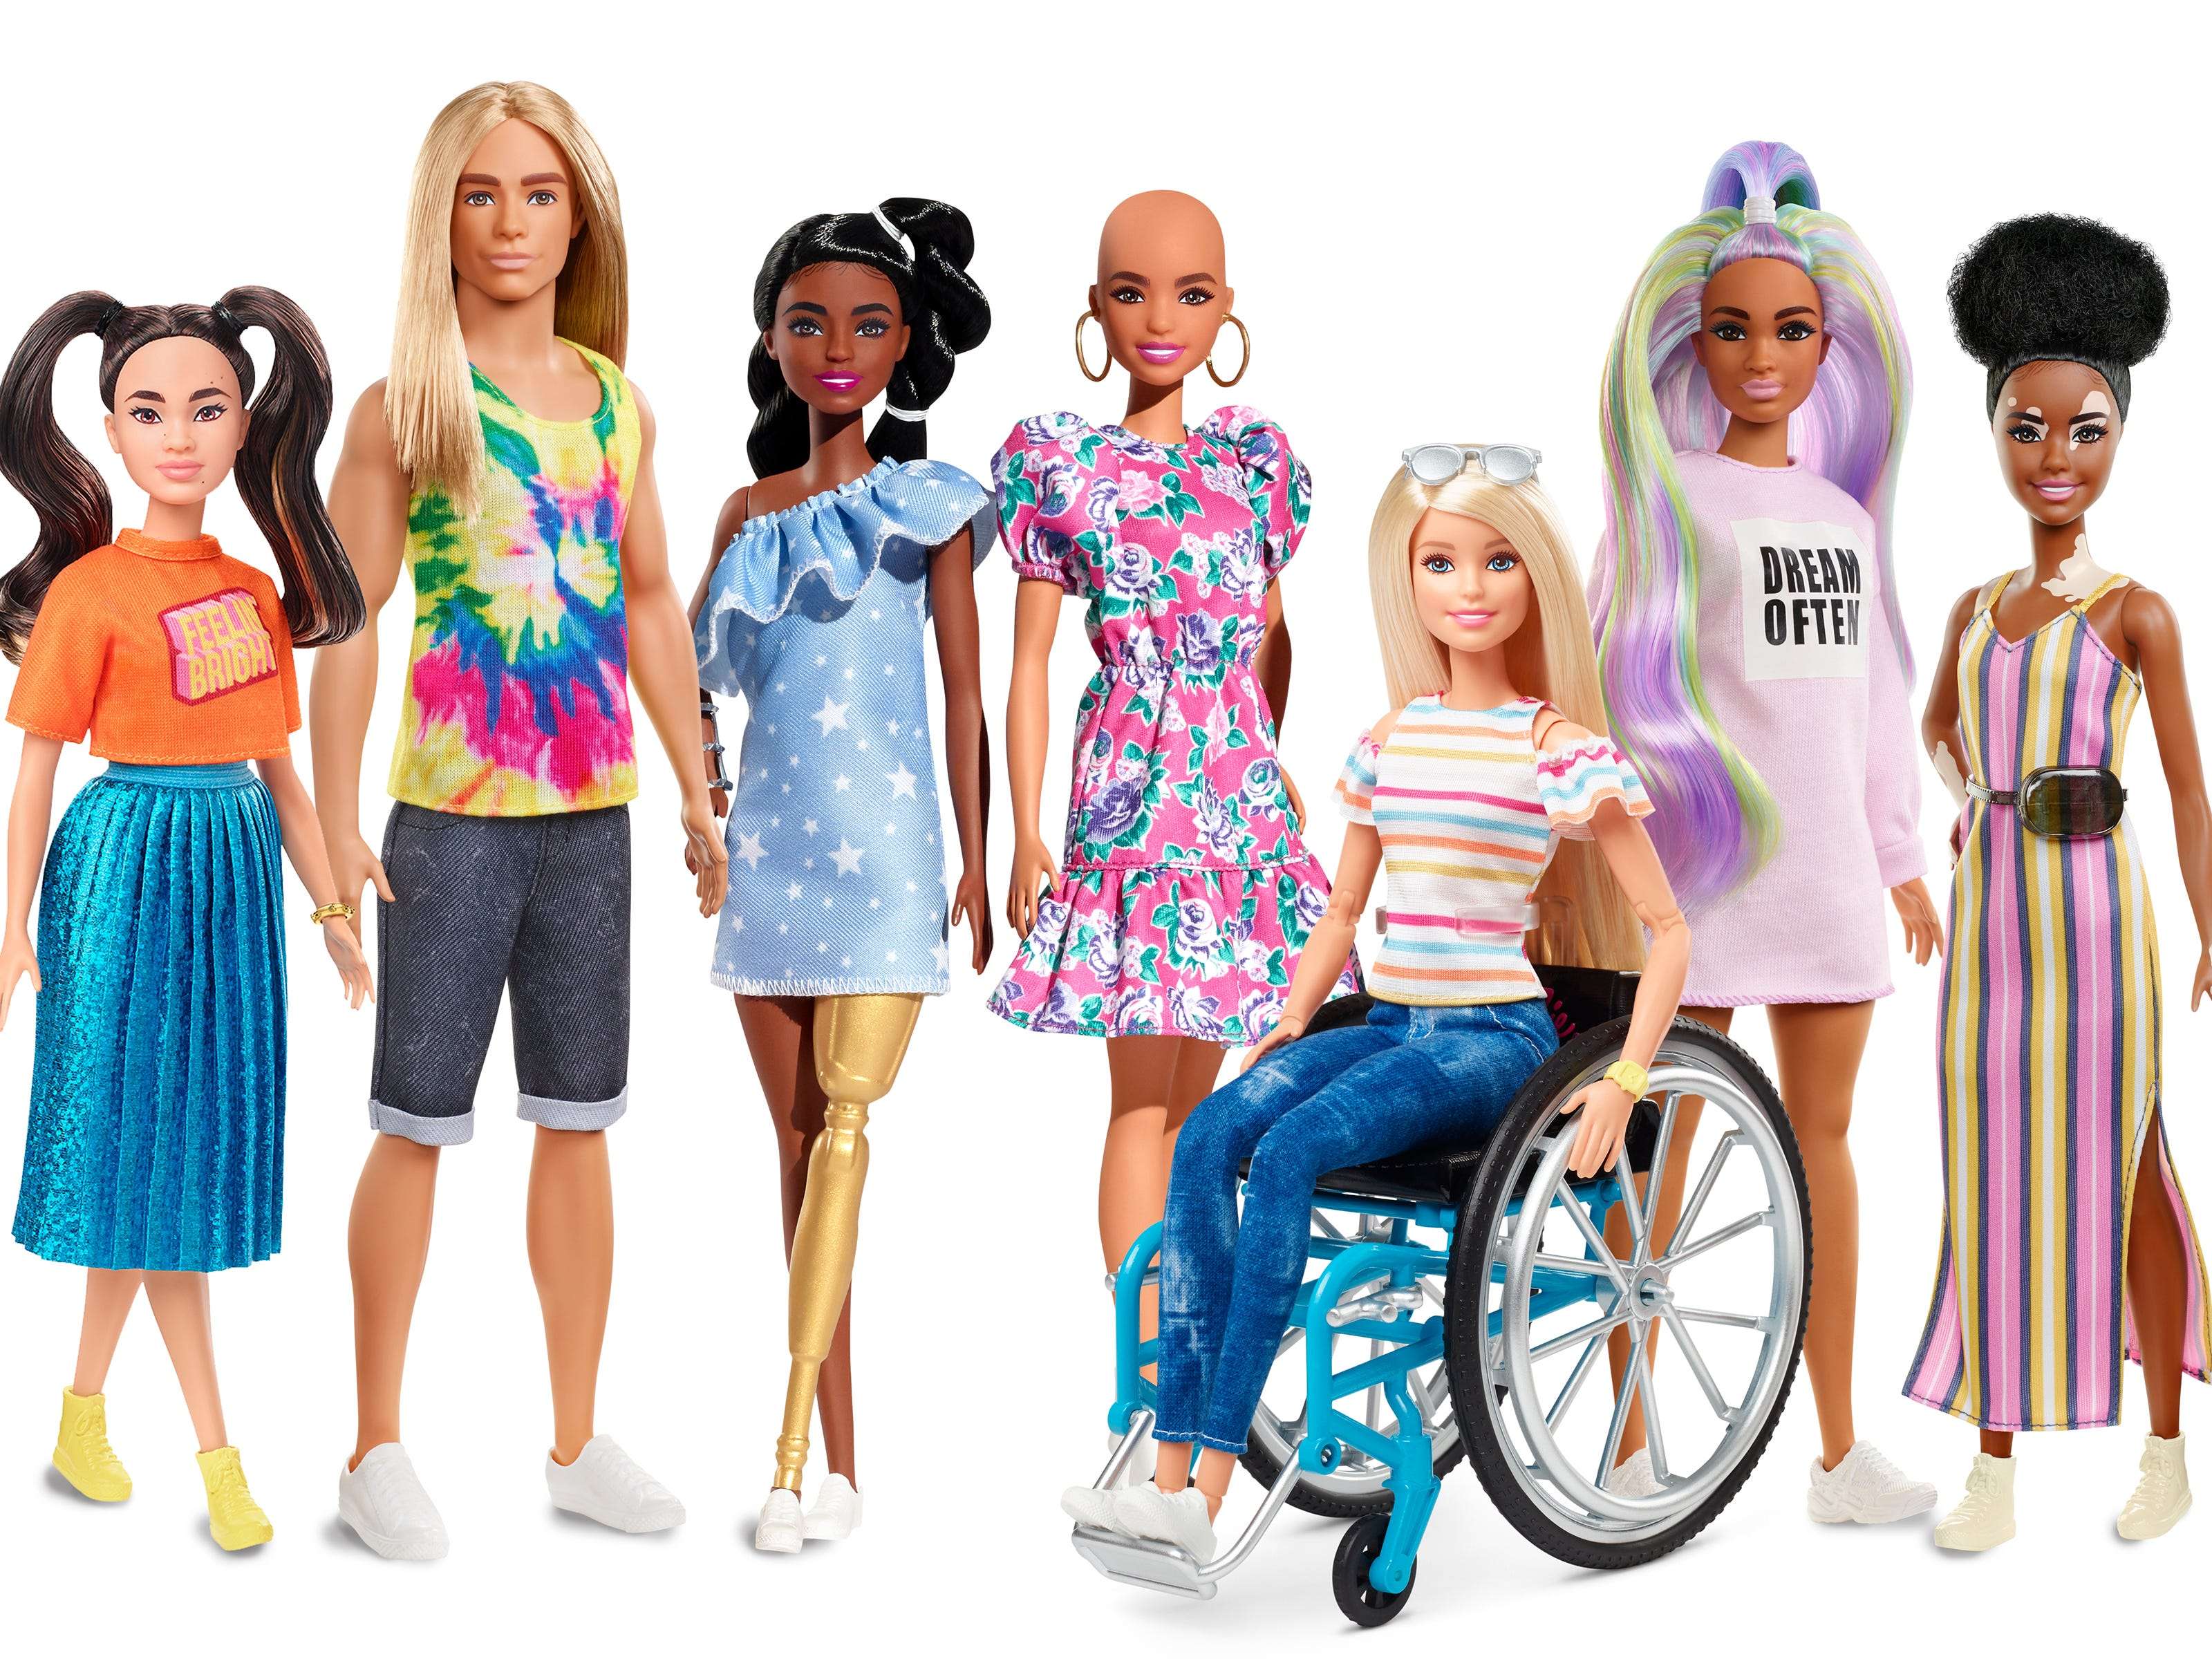 Here's what Barbie looked like the year you were born